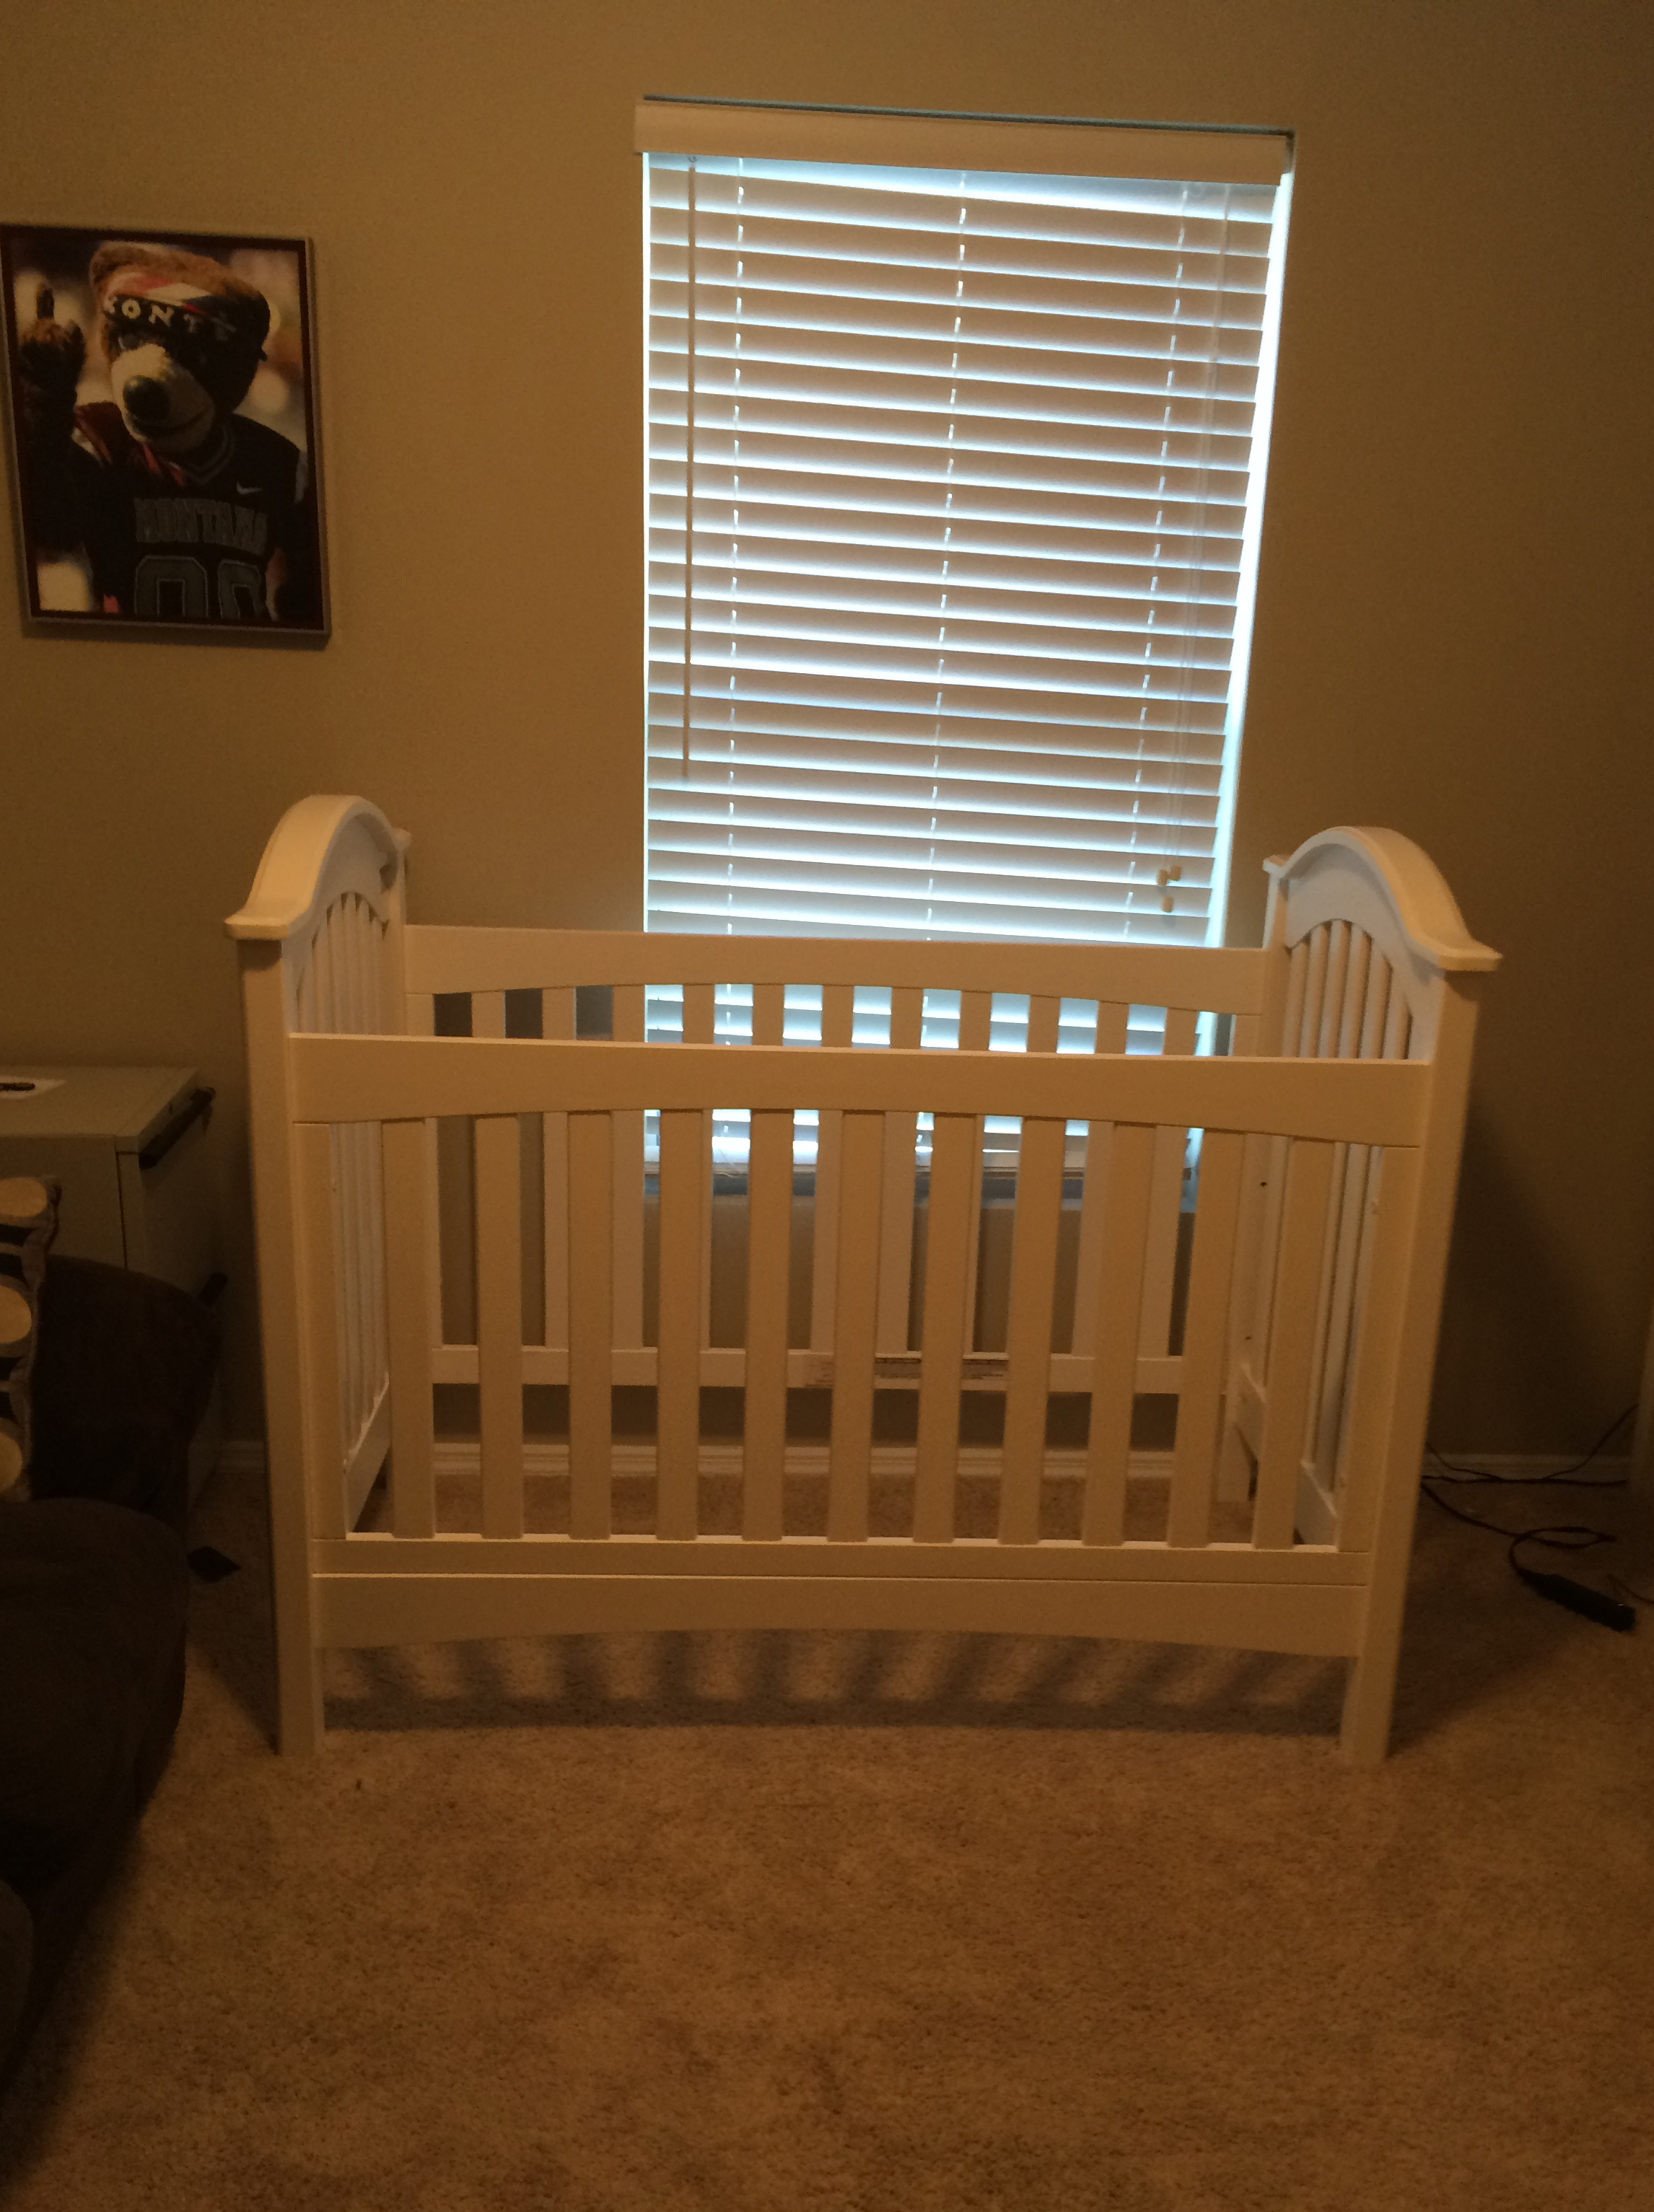 This is the crib we bought last week for our baby!